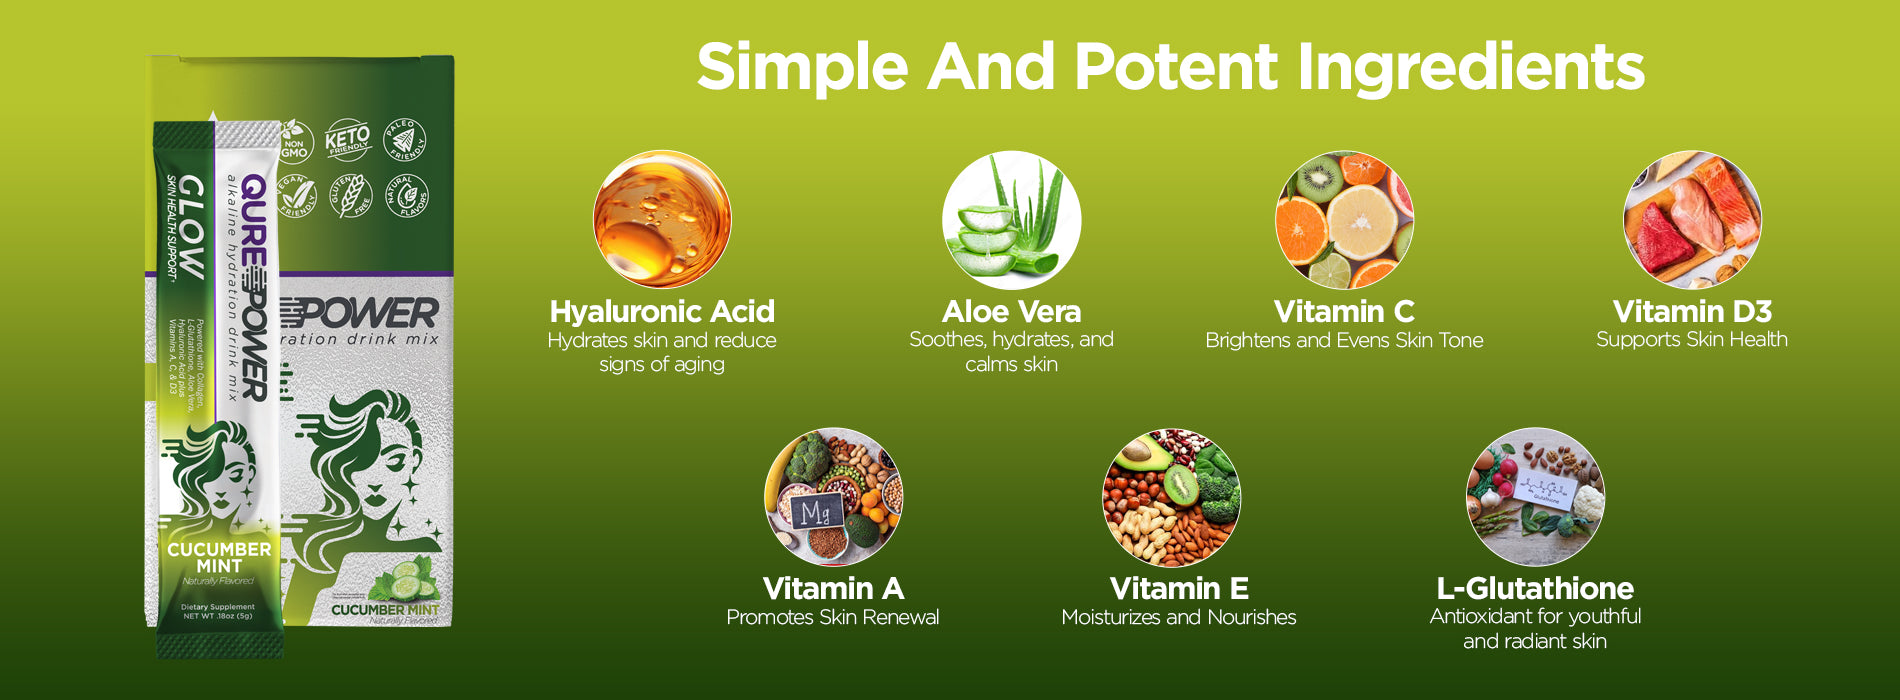 simple and potent ingredients